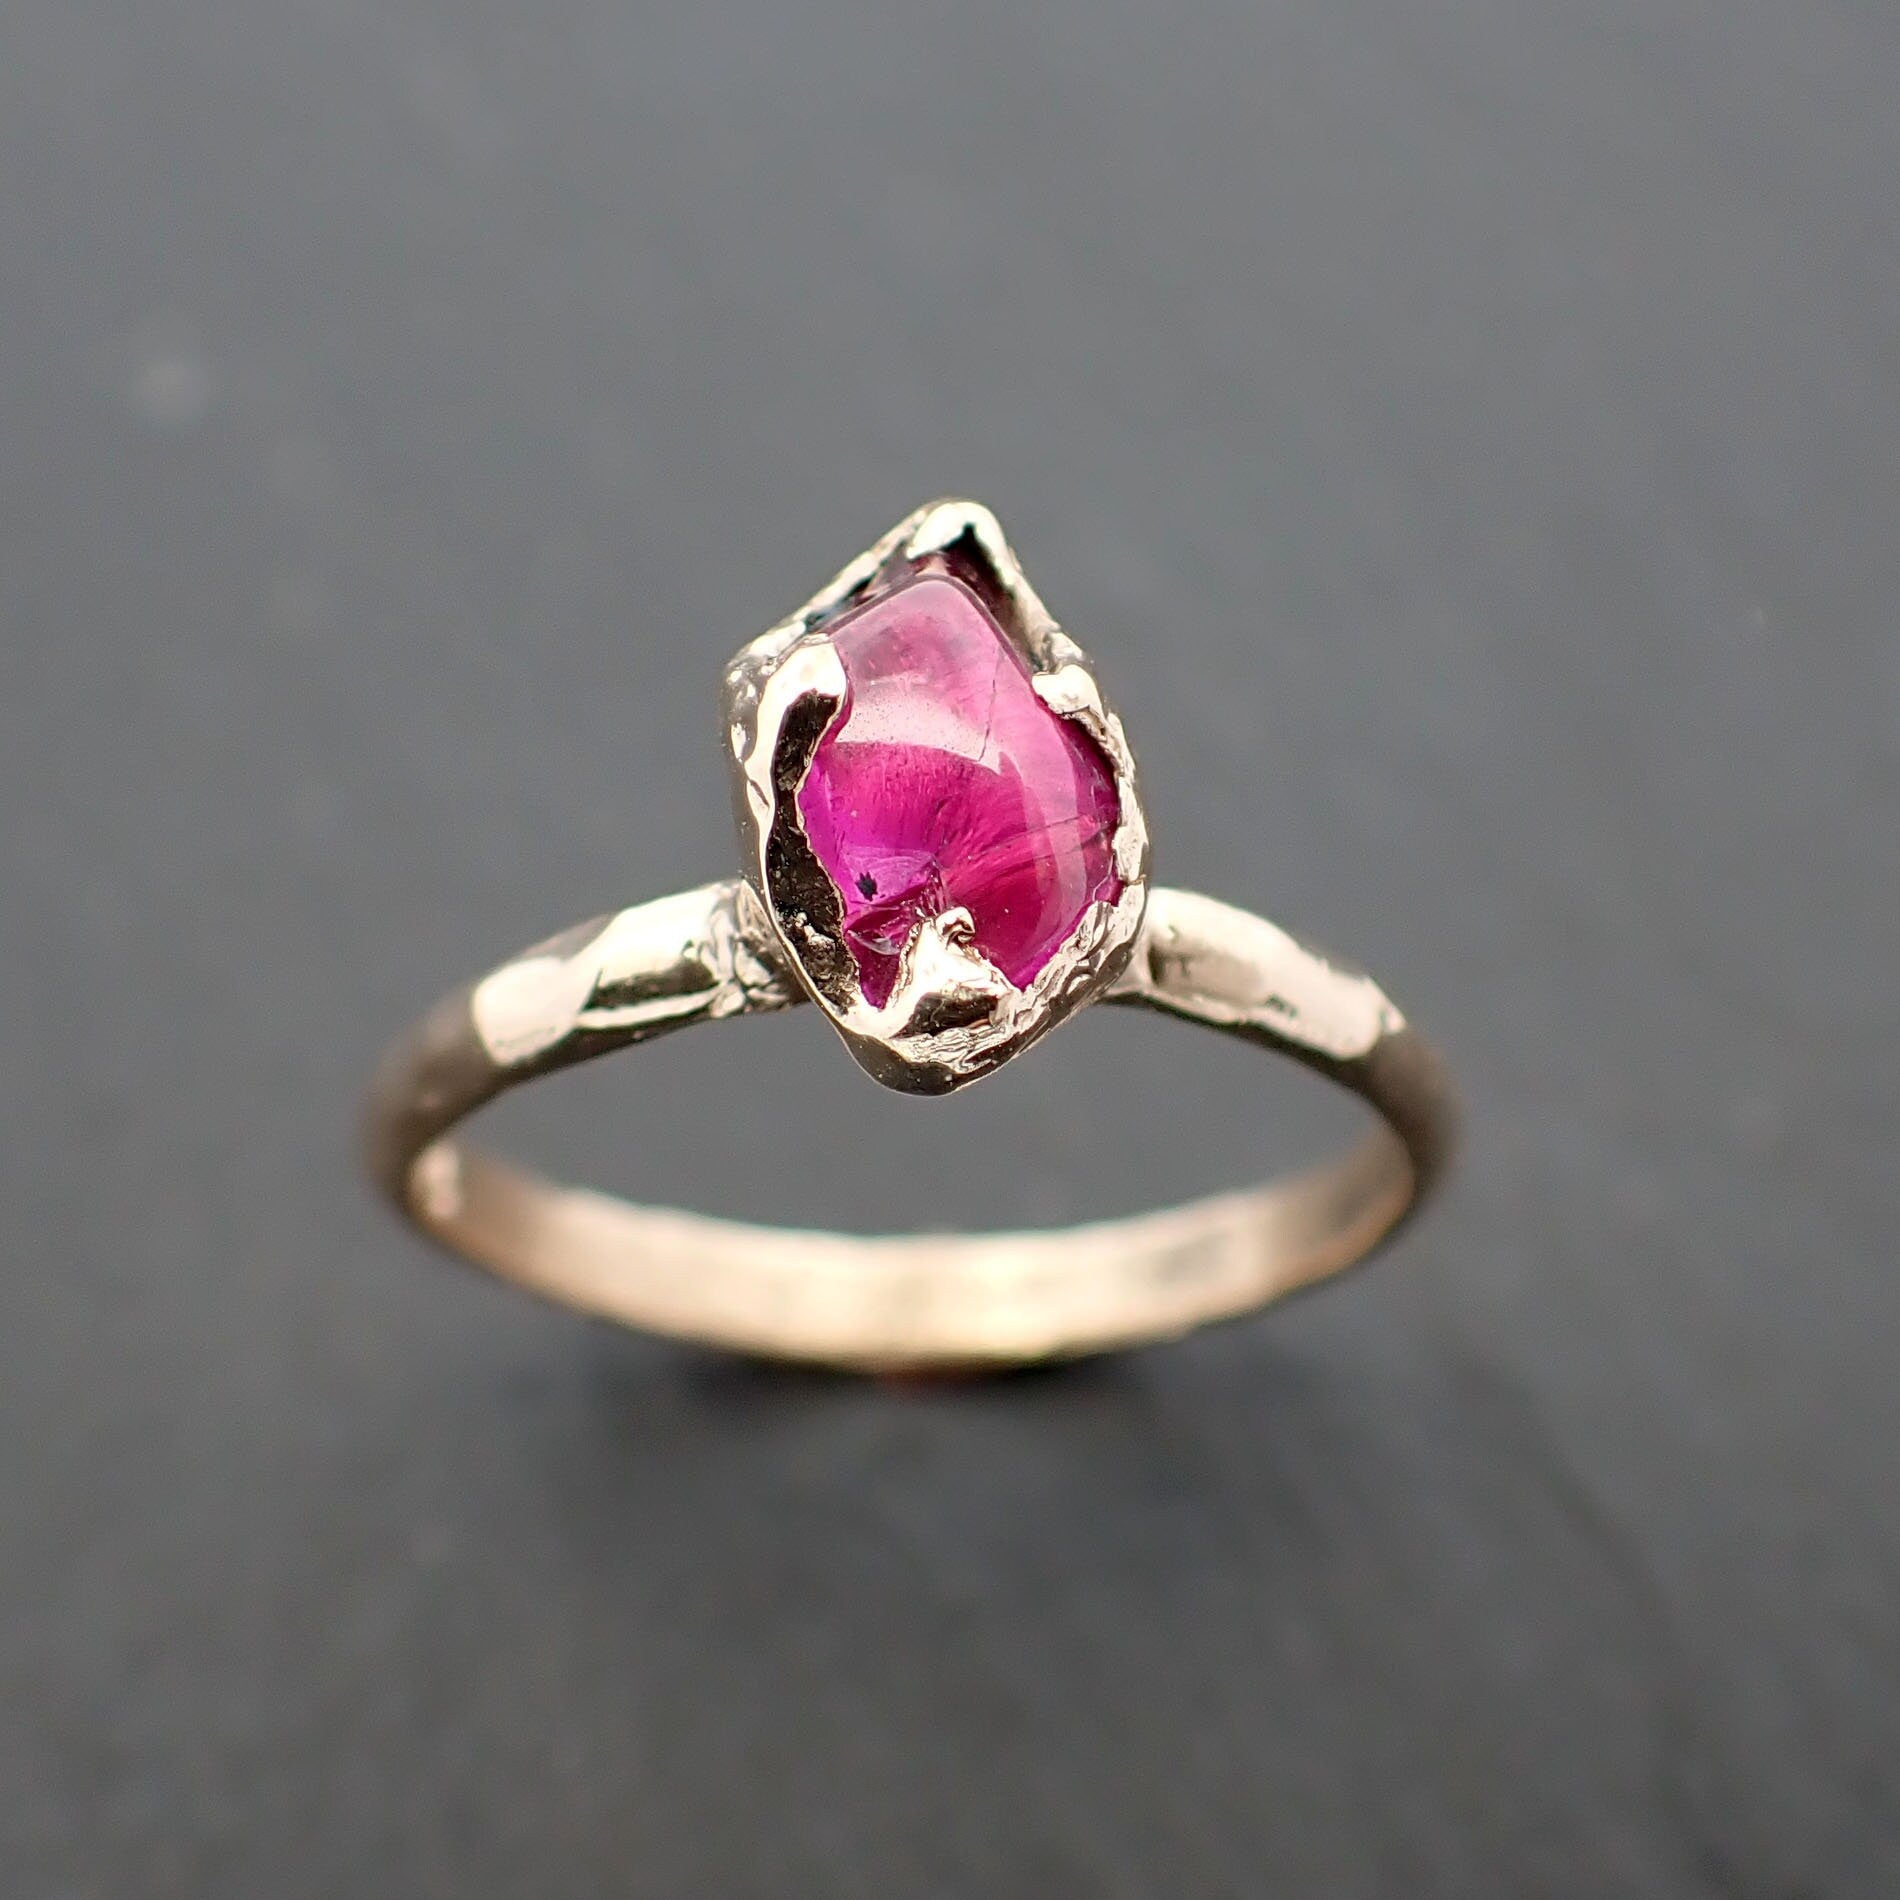 Garnet tumbled red 14k gold Solitaire gemstone ring 3487